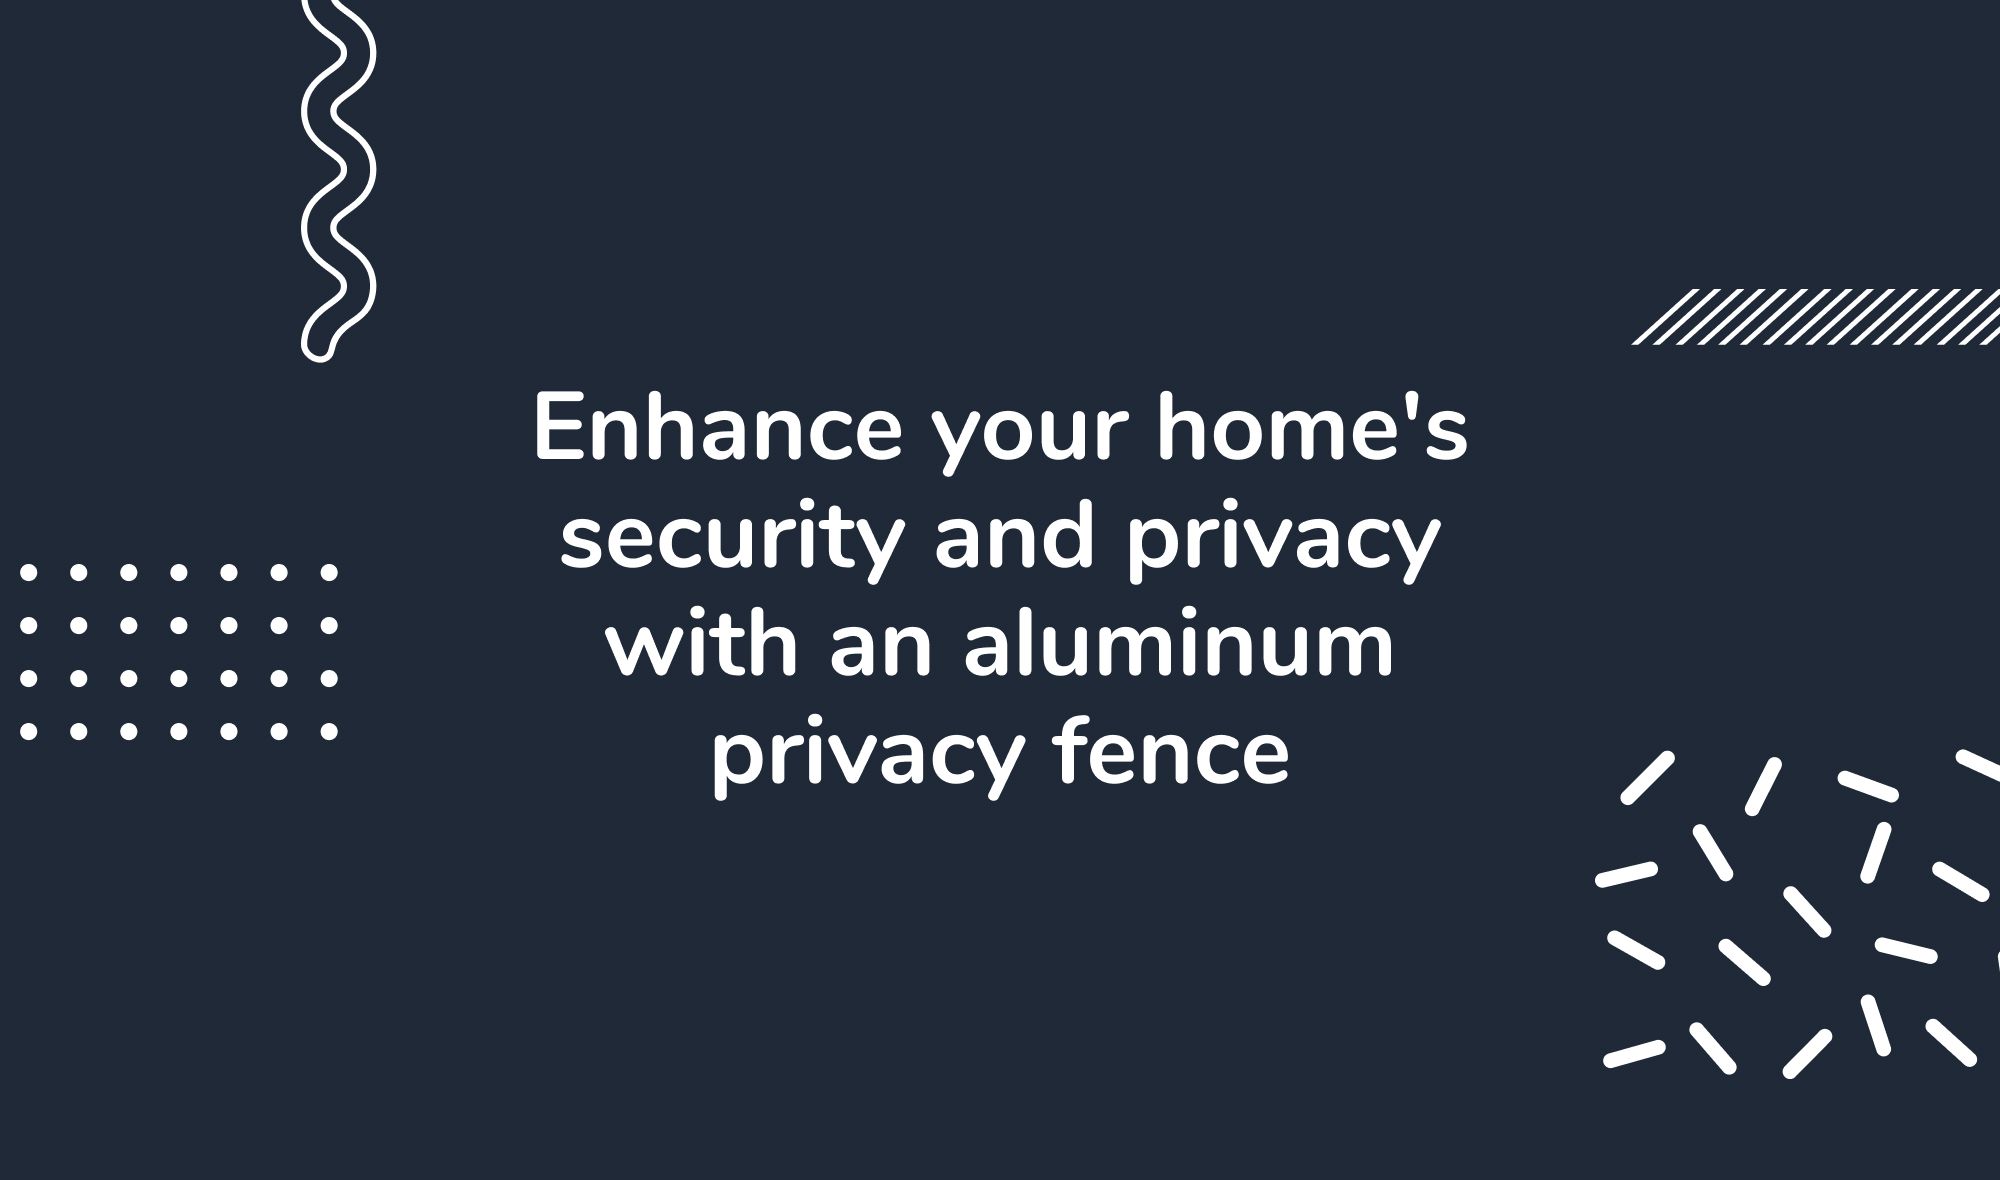 Enhance your home's security and privacy with an aluminum privacy fence